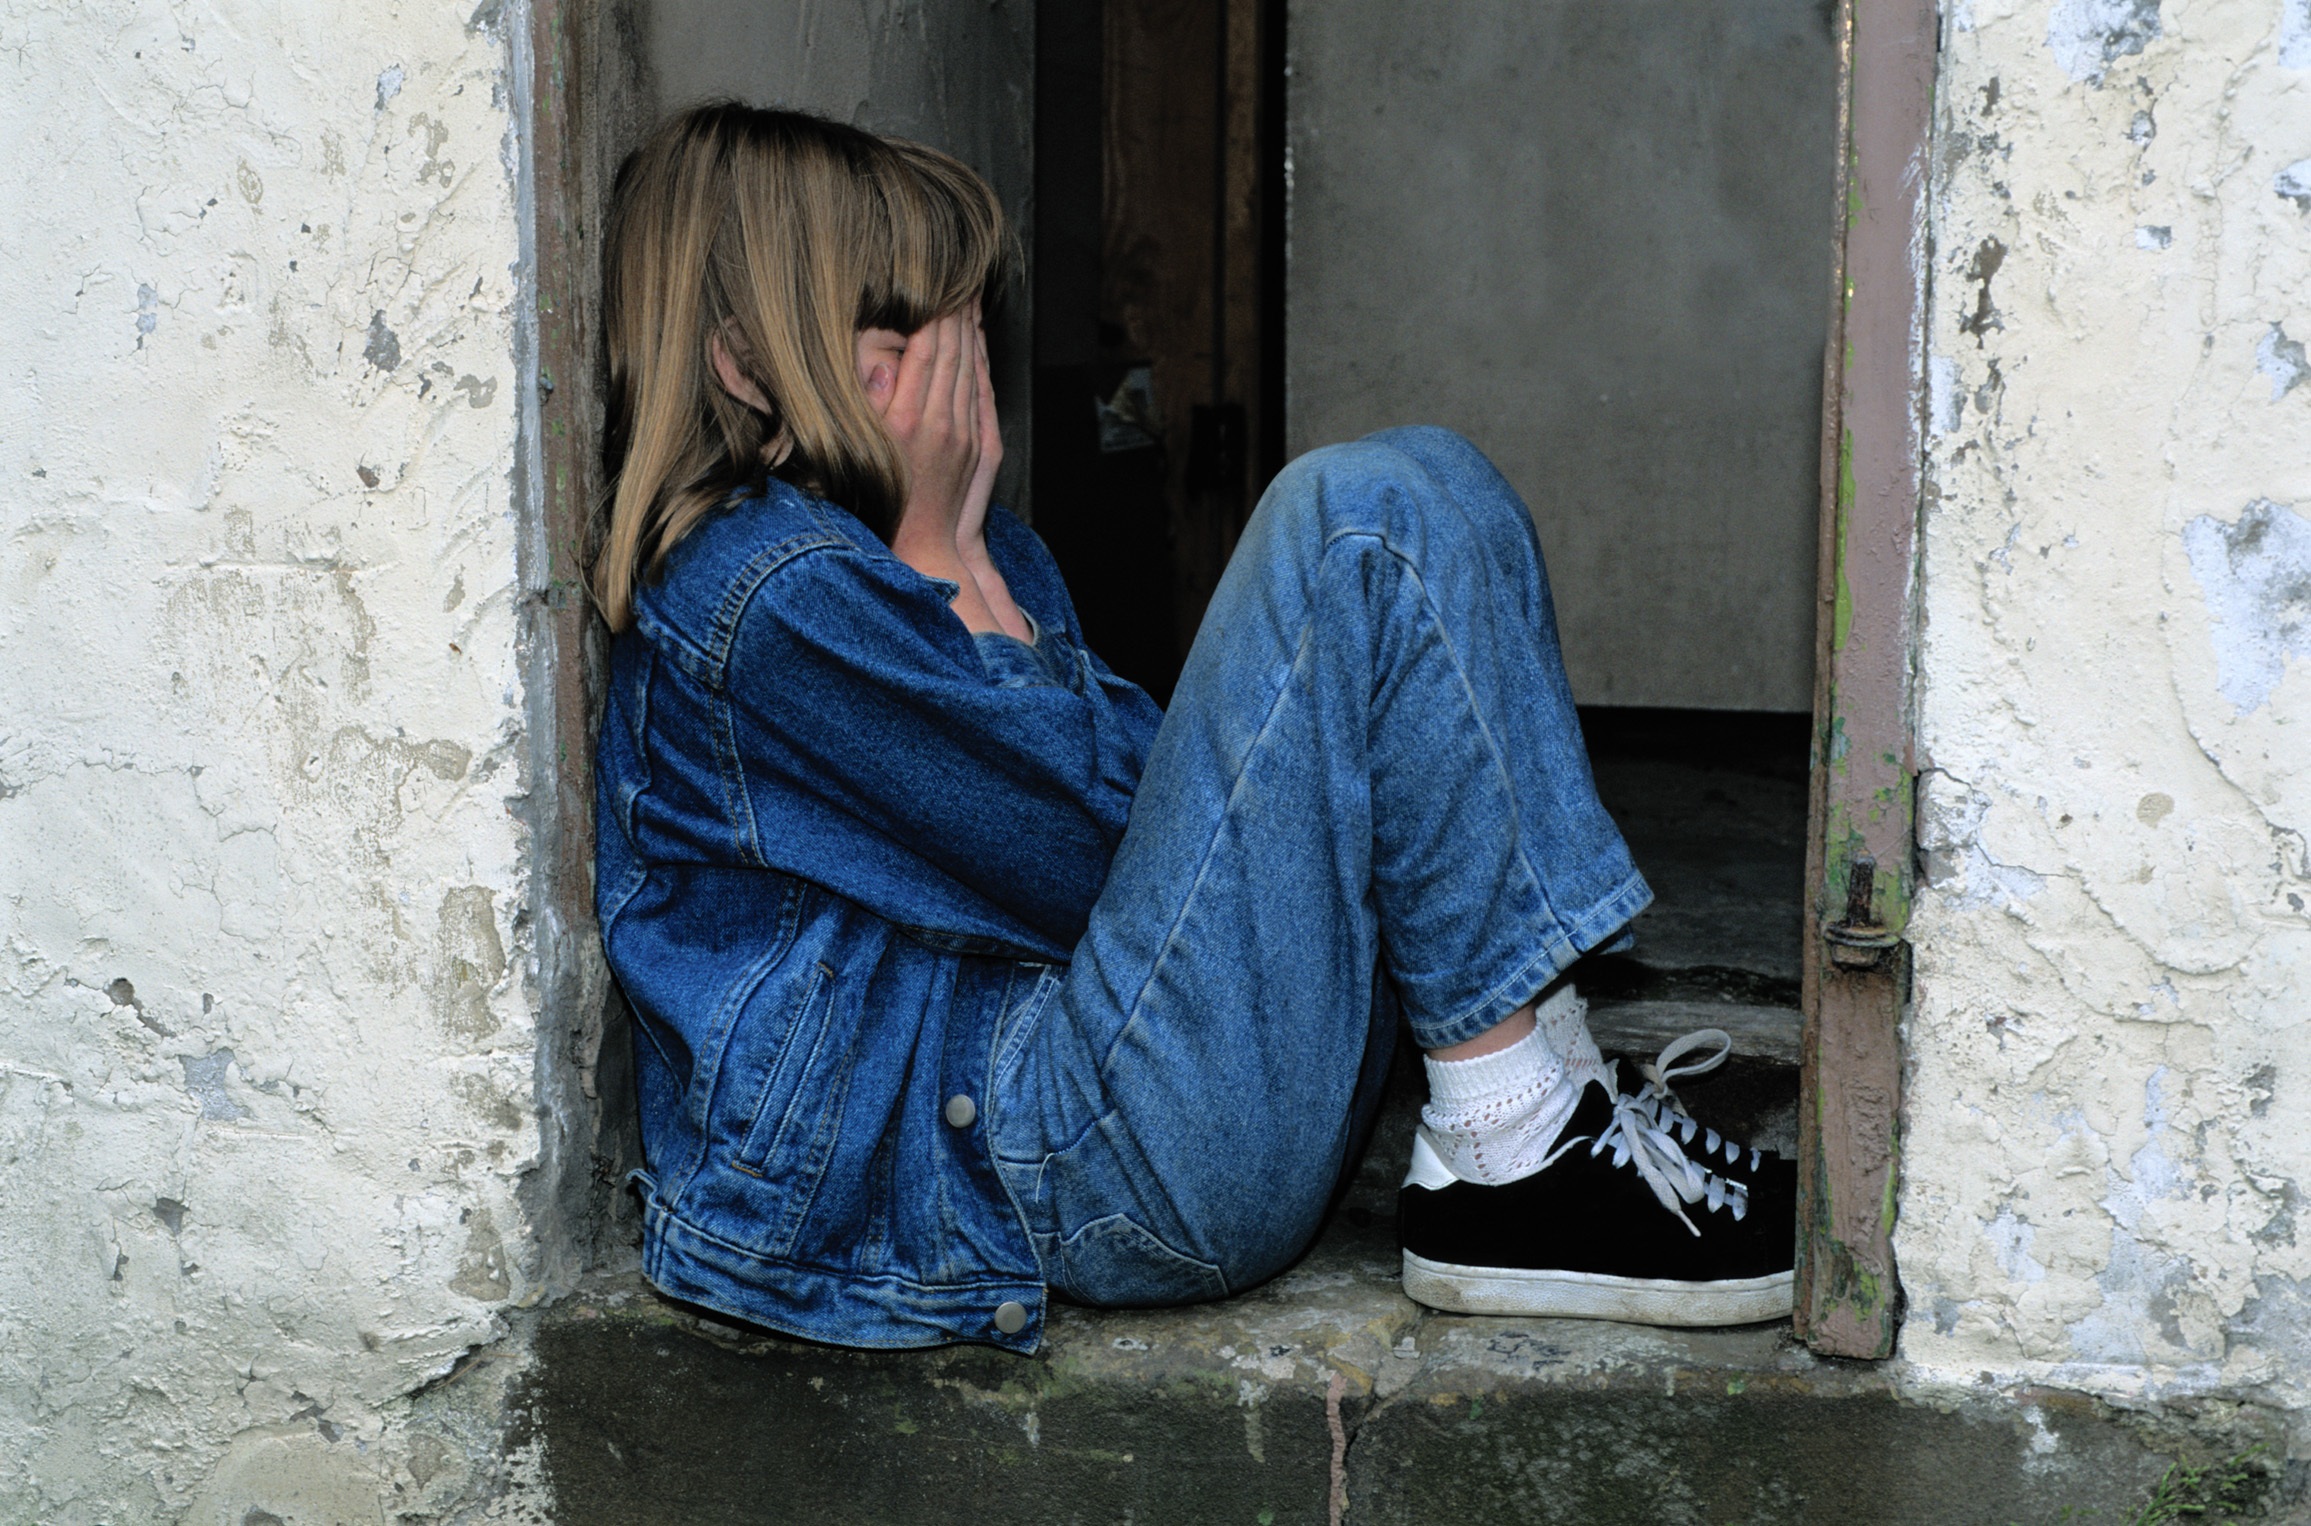 Cyberbully or victim? Here’s what research says about kids who bully (or are bullied) online